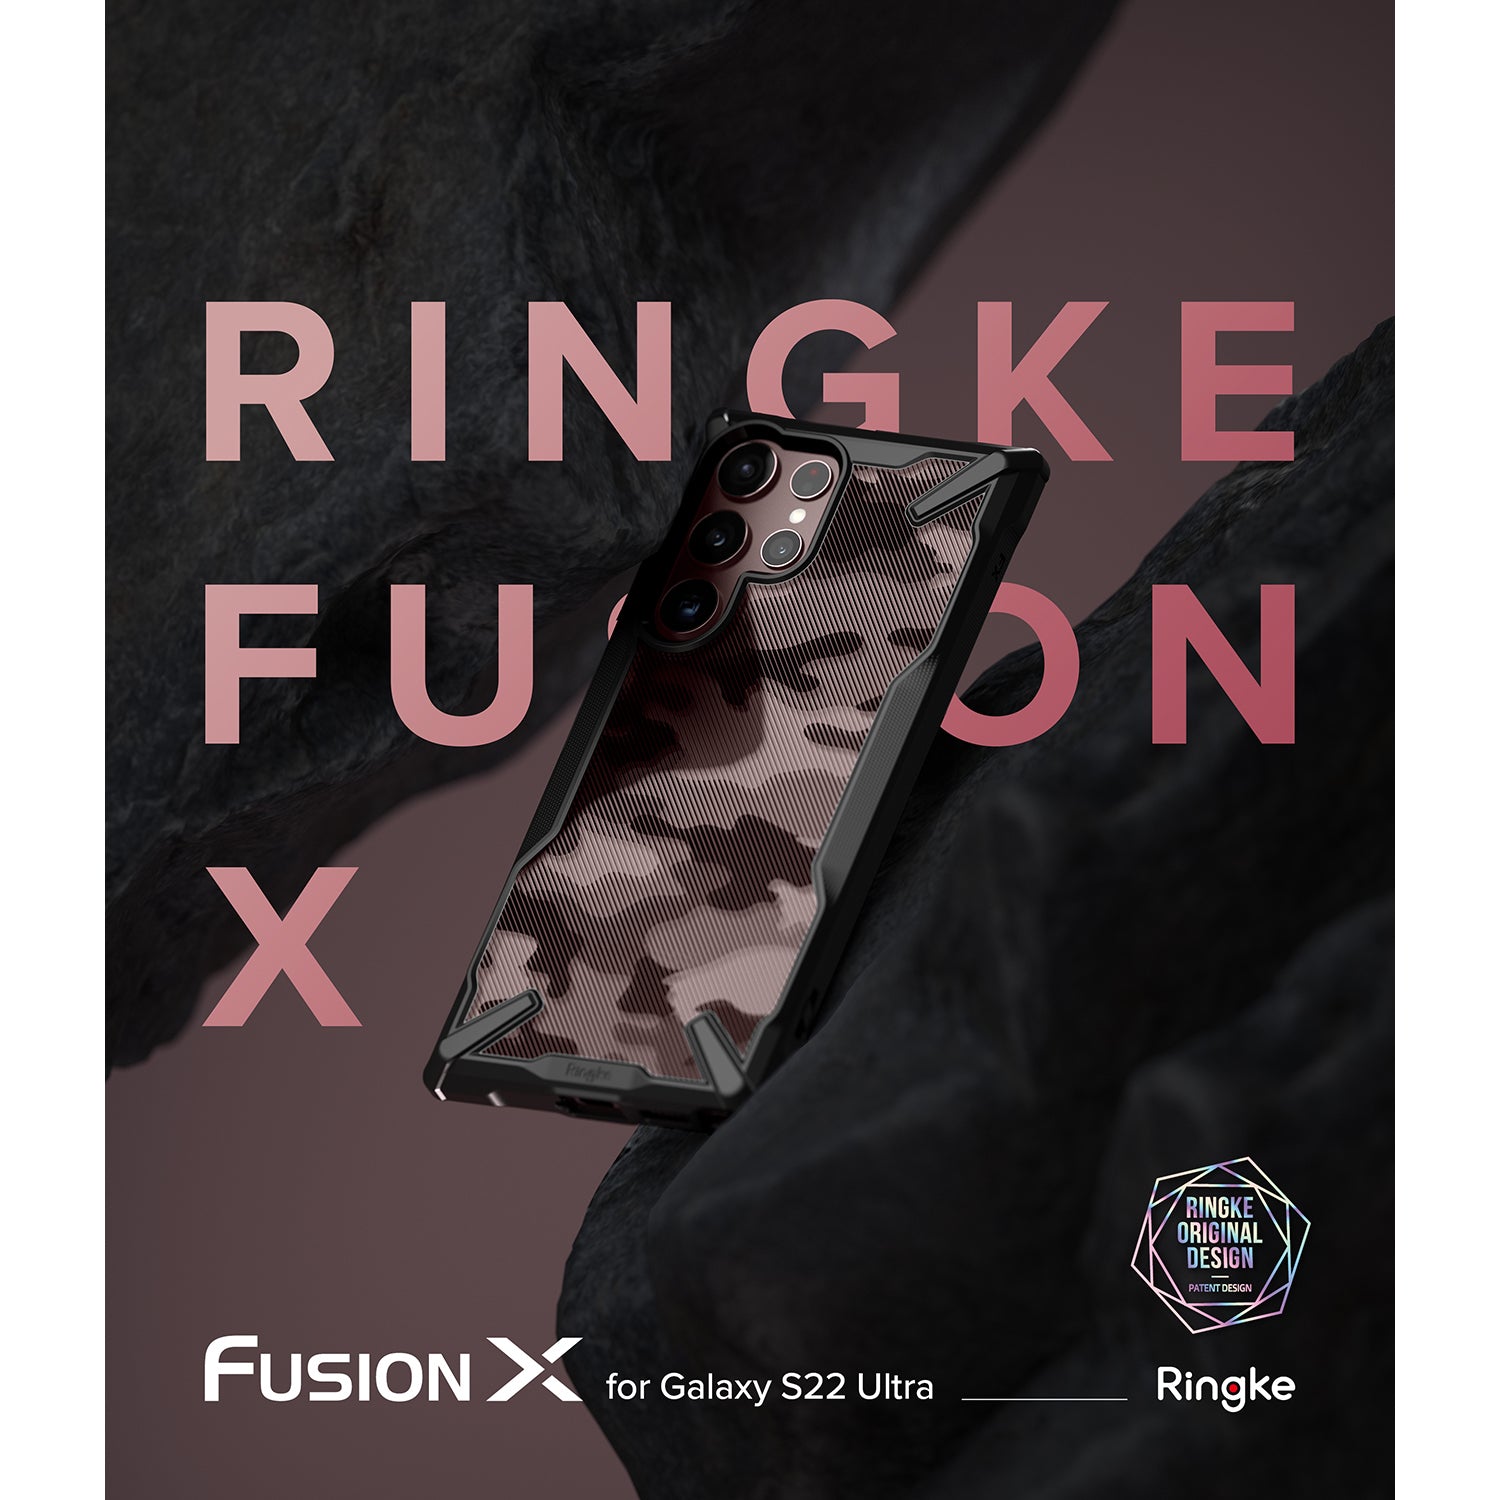 Ringke Fusion X Case for Samsung Galaxy S22 Ultra Default Ringke 